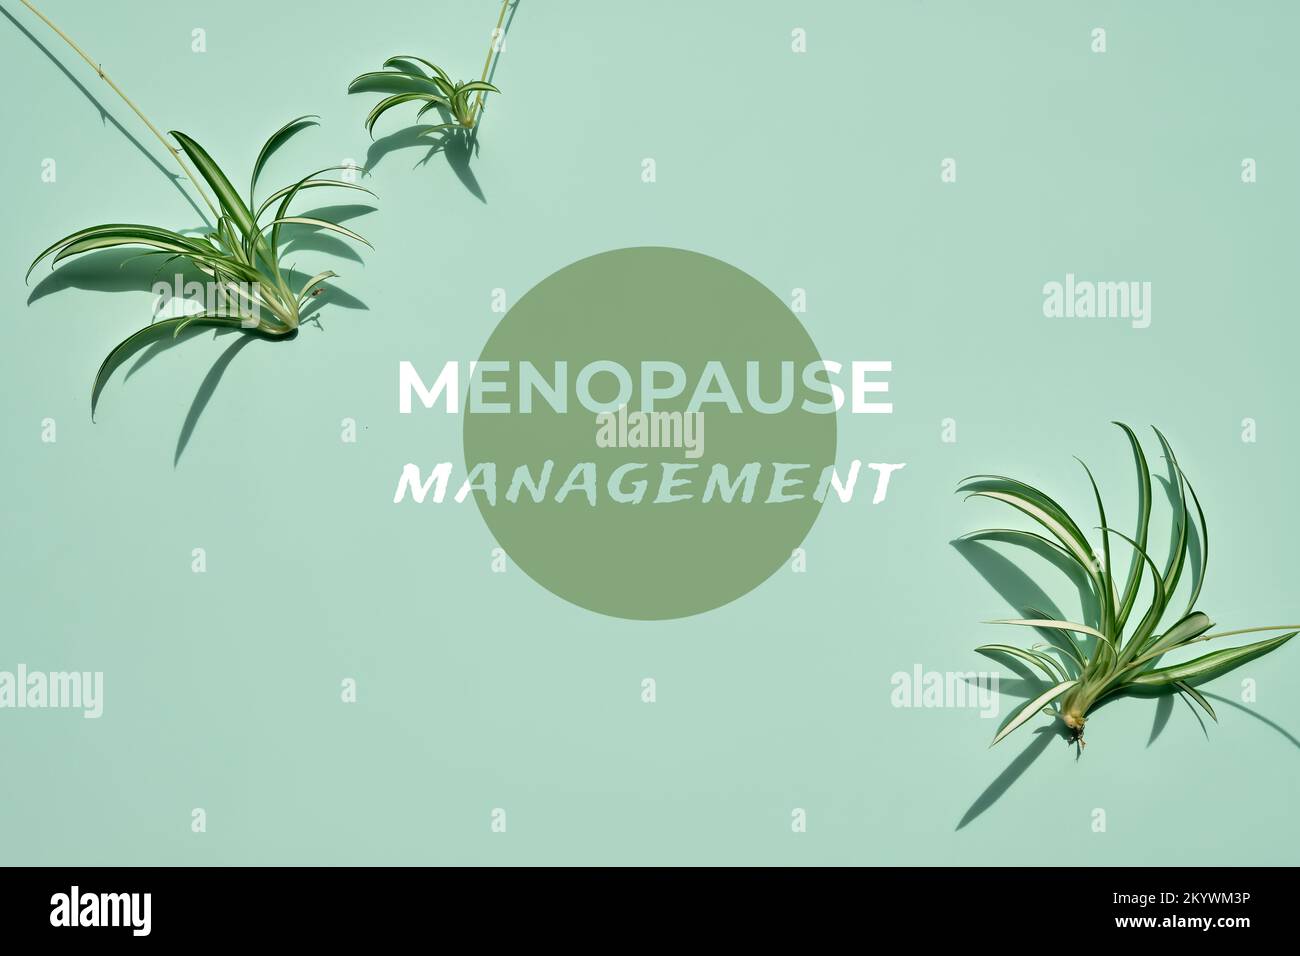 Menpause management banner, card design. Tradescantia plants on mint green background. Flat lay, top view from above. Stock Photo